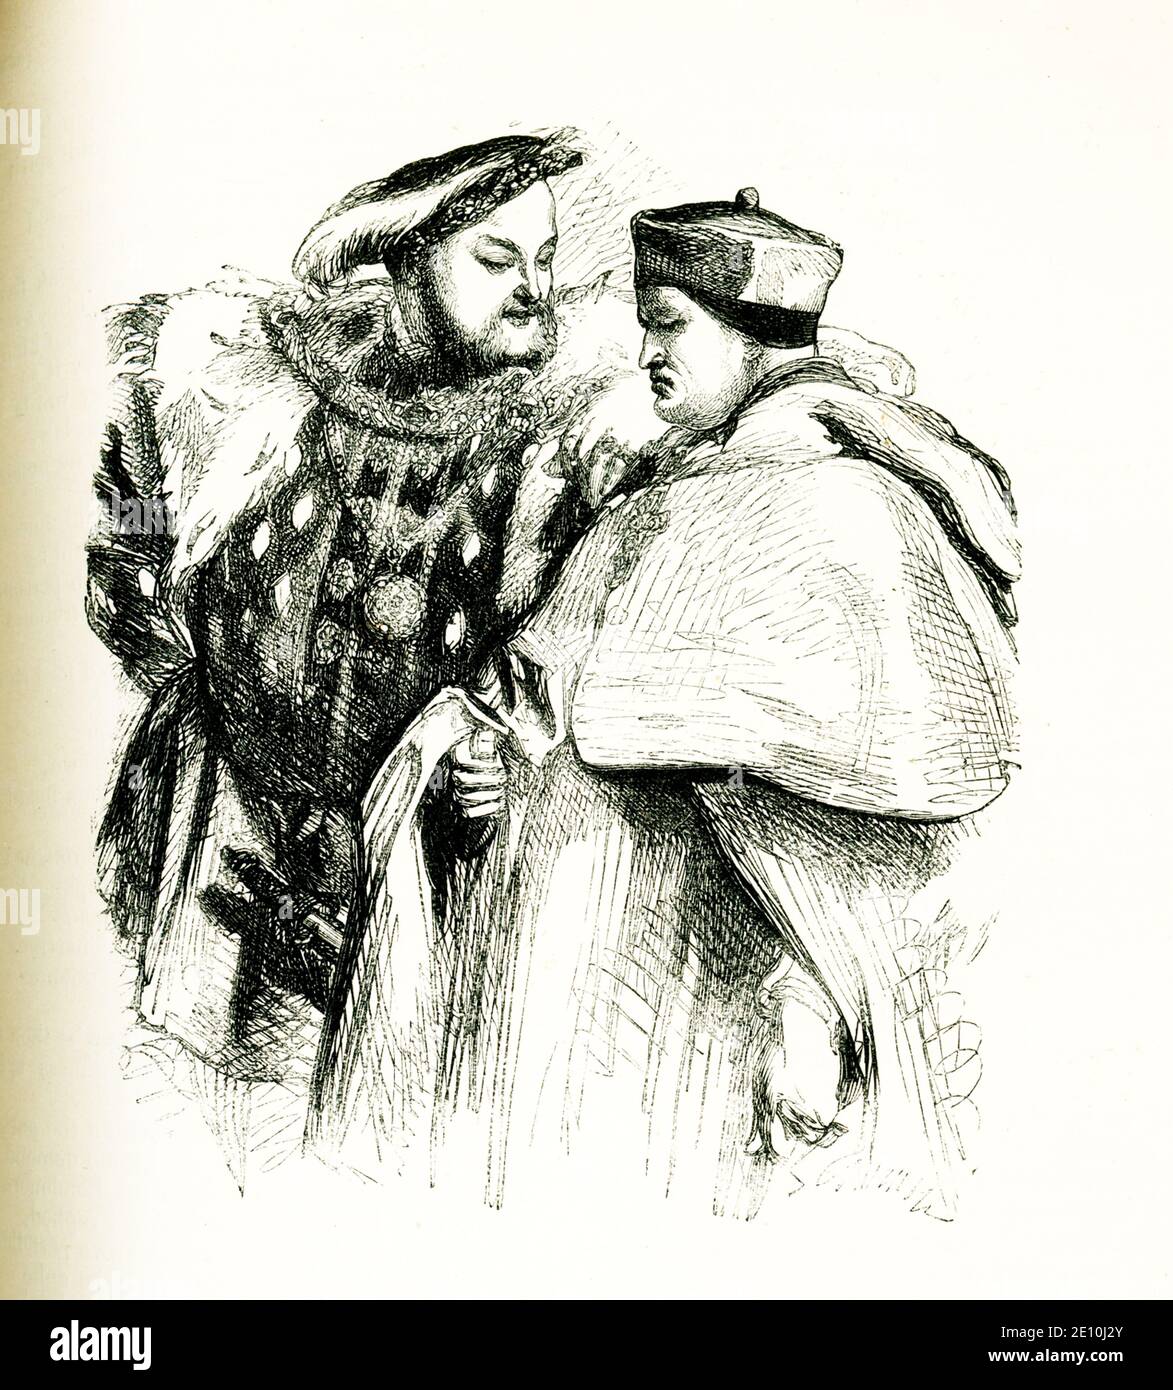 This scene complements William Shakespeare's tragedy titled Henry VIII. It illustrates lines in Act I Scene II.  Shown here are Henry VIII and Cardinal Wolsey. The illustration is by Sir John Gilbert (1817-1897), renowned for his prolific illustration of Shakespeare's works. Shakespeare was born in 1564 and died in1616. The book dates to 1887. Stock Photo